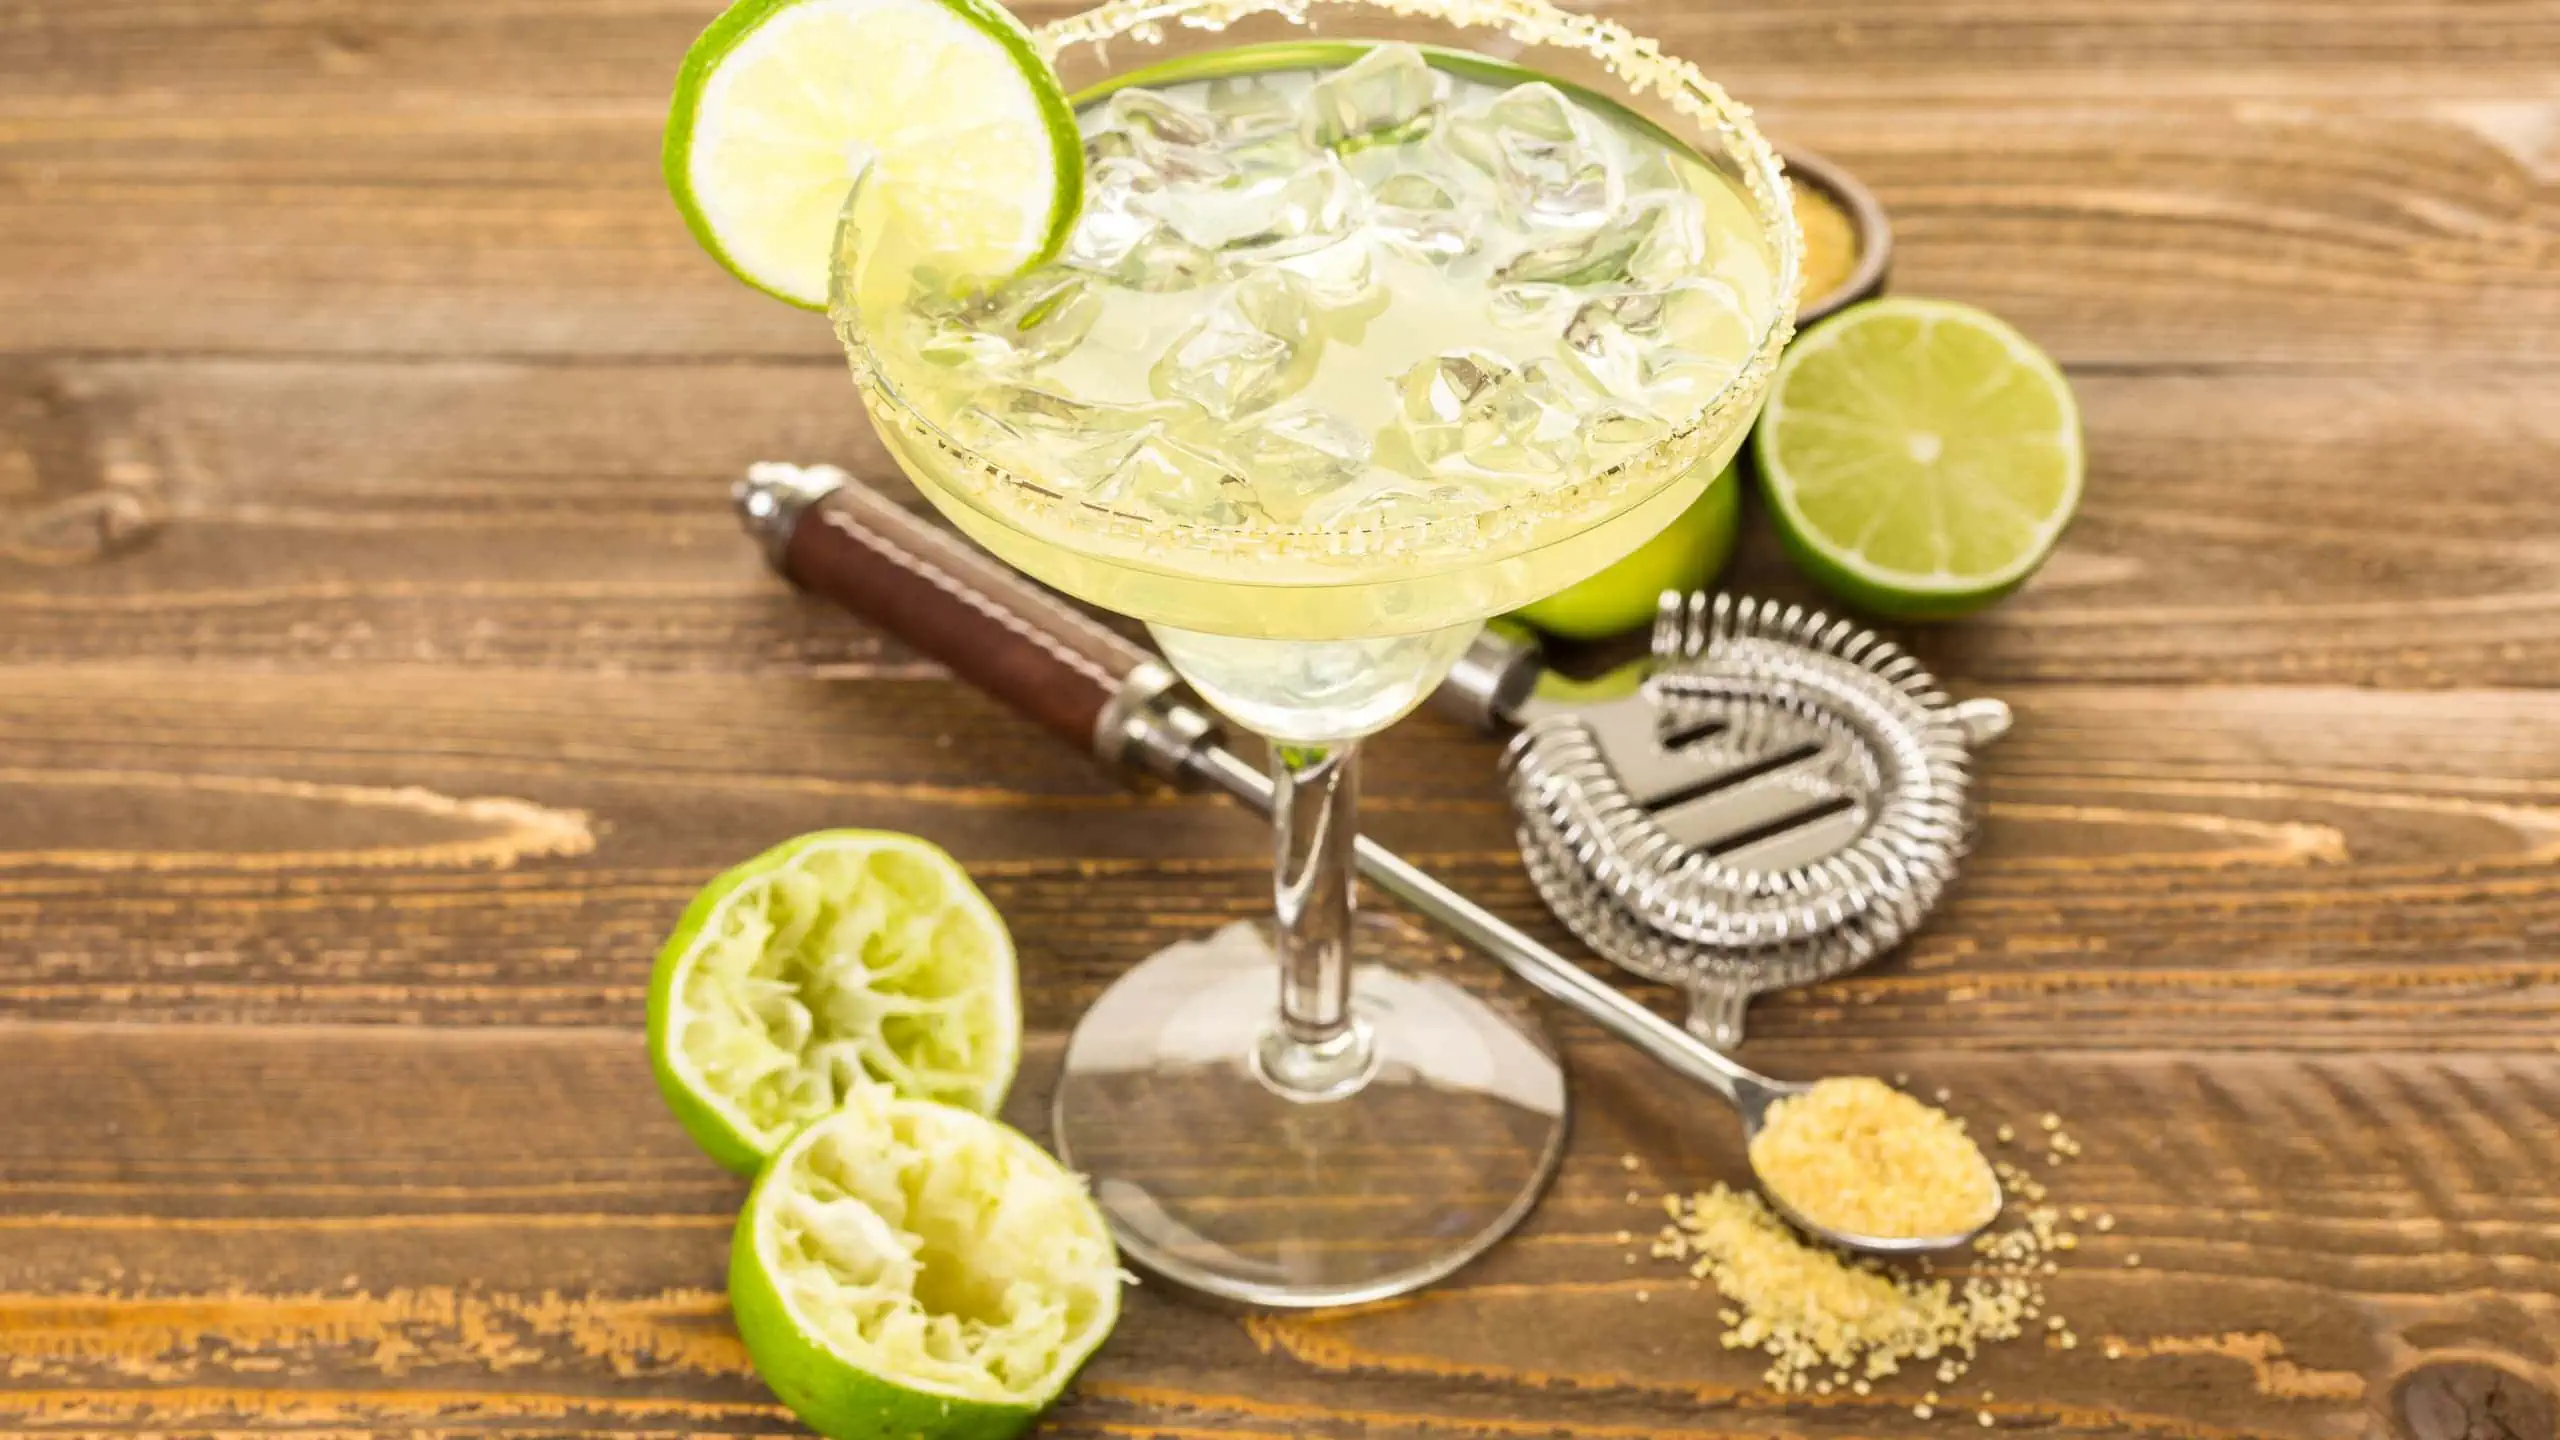 Applebee's perfect margarita recipe with lime and brown sugar